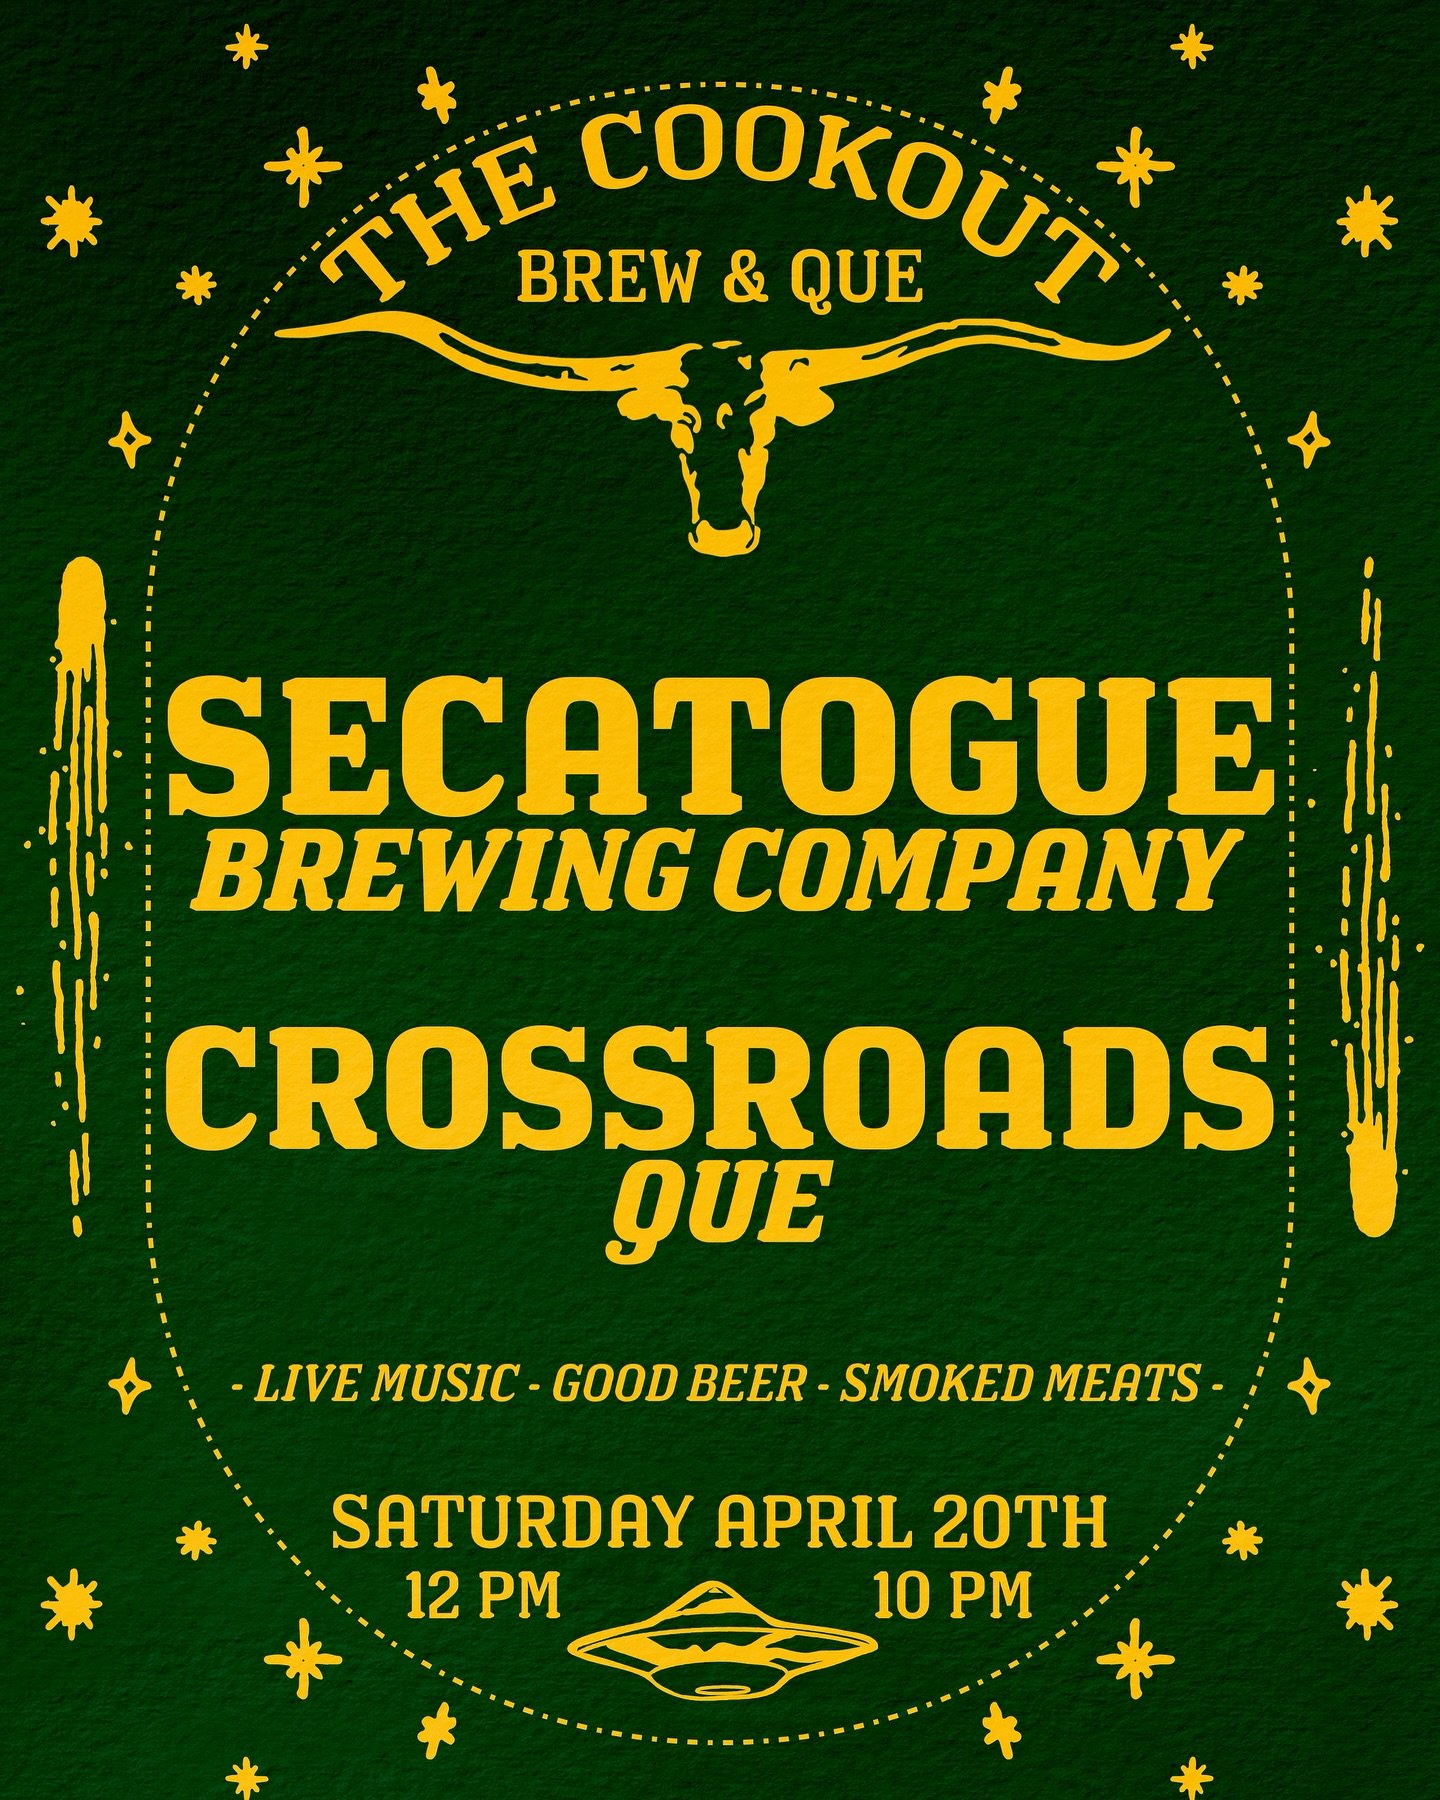 Tonight at 5pm and again all day Saturday, we are hanging with our friends @secatoguebrewingco. The team is feeling great after its debut @brisketkingnyc. Check out our stories to see the craziness from yesterday. 

#brisketlovers #smokeonthewater #c